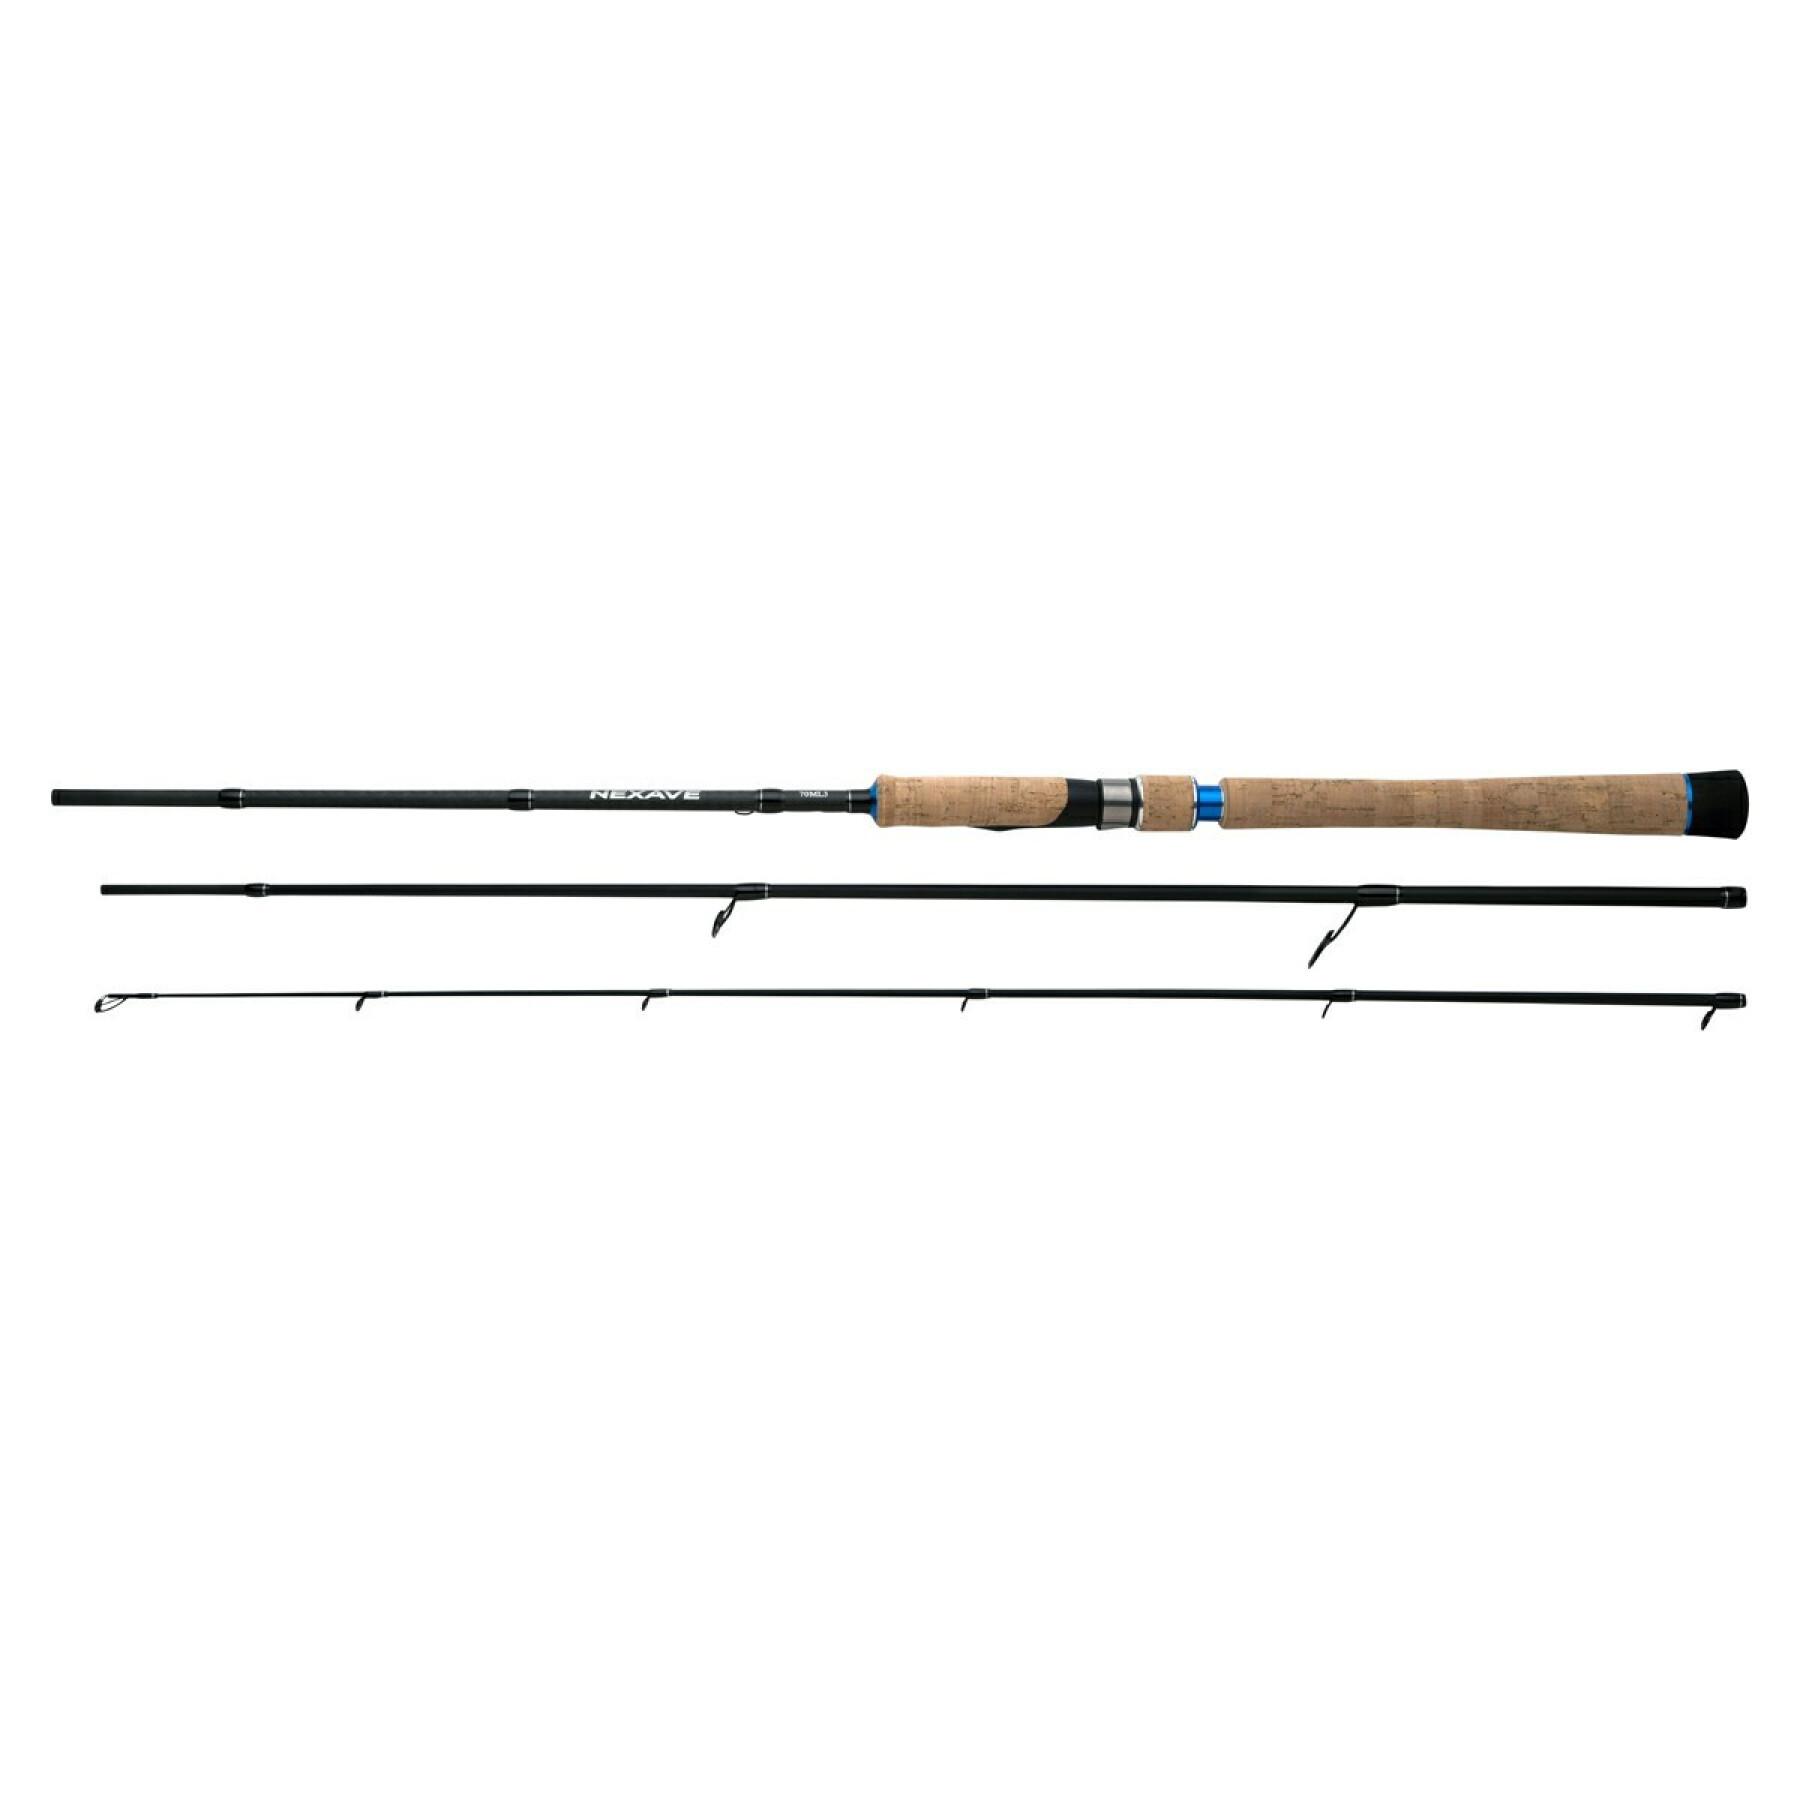 Canne spinning Shimano Nexave Spinning MOD-FAST 2,69m 8'10'' 14-42g